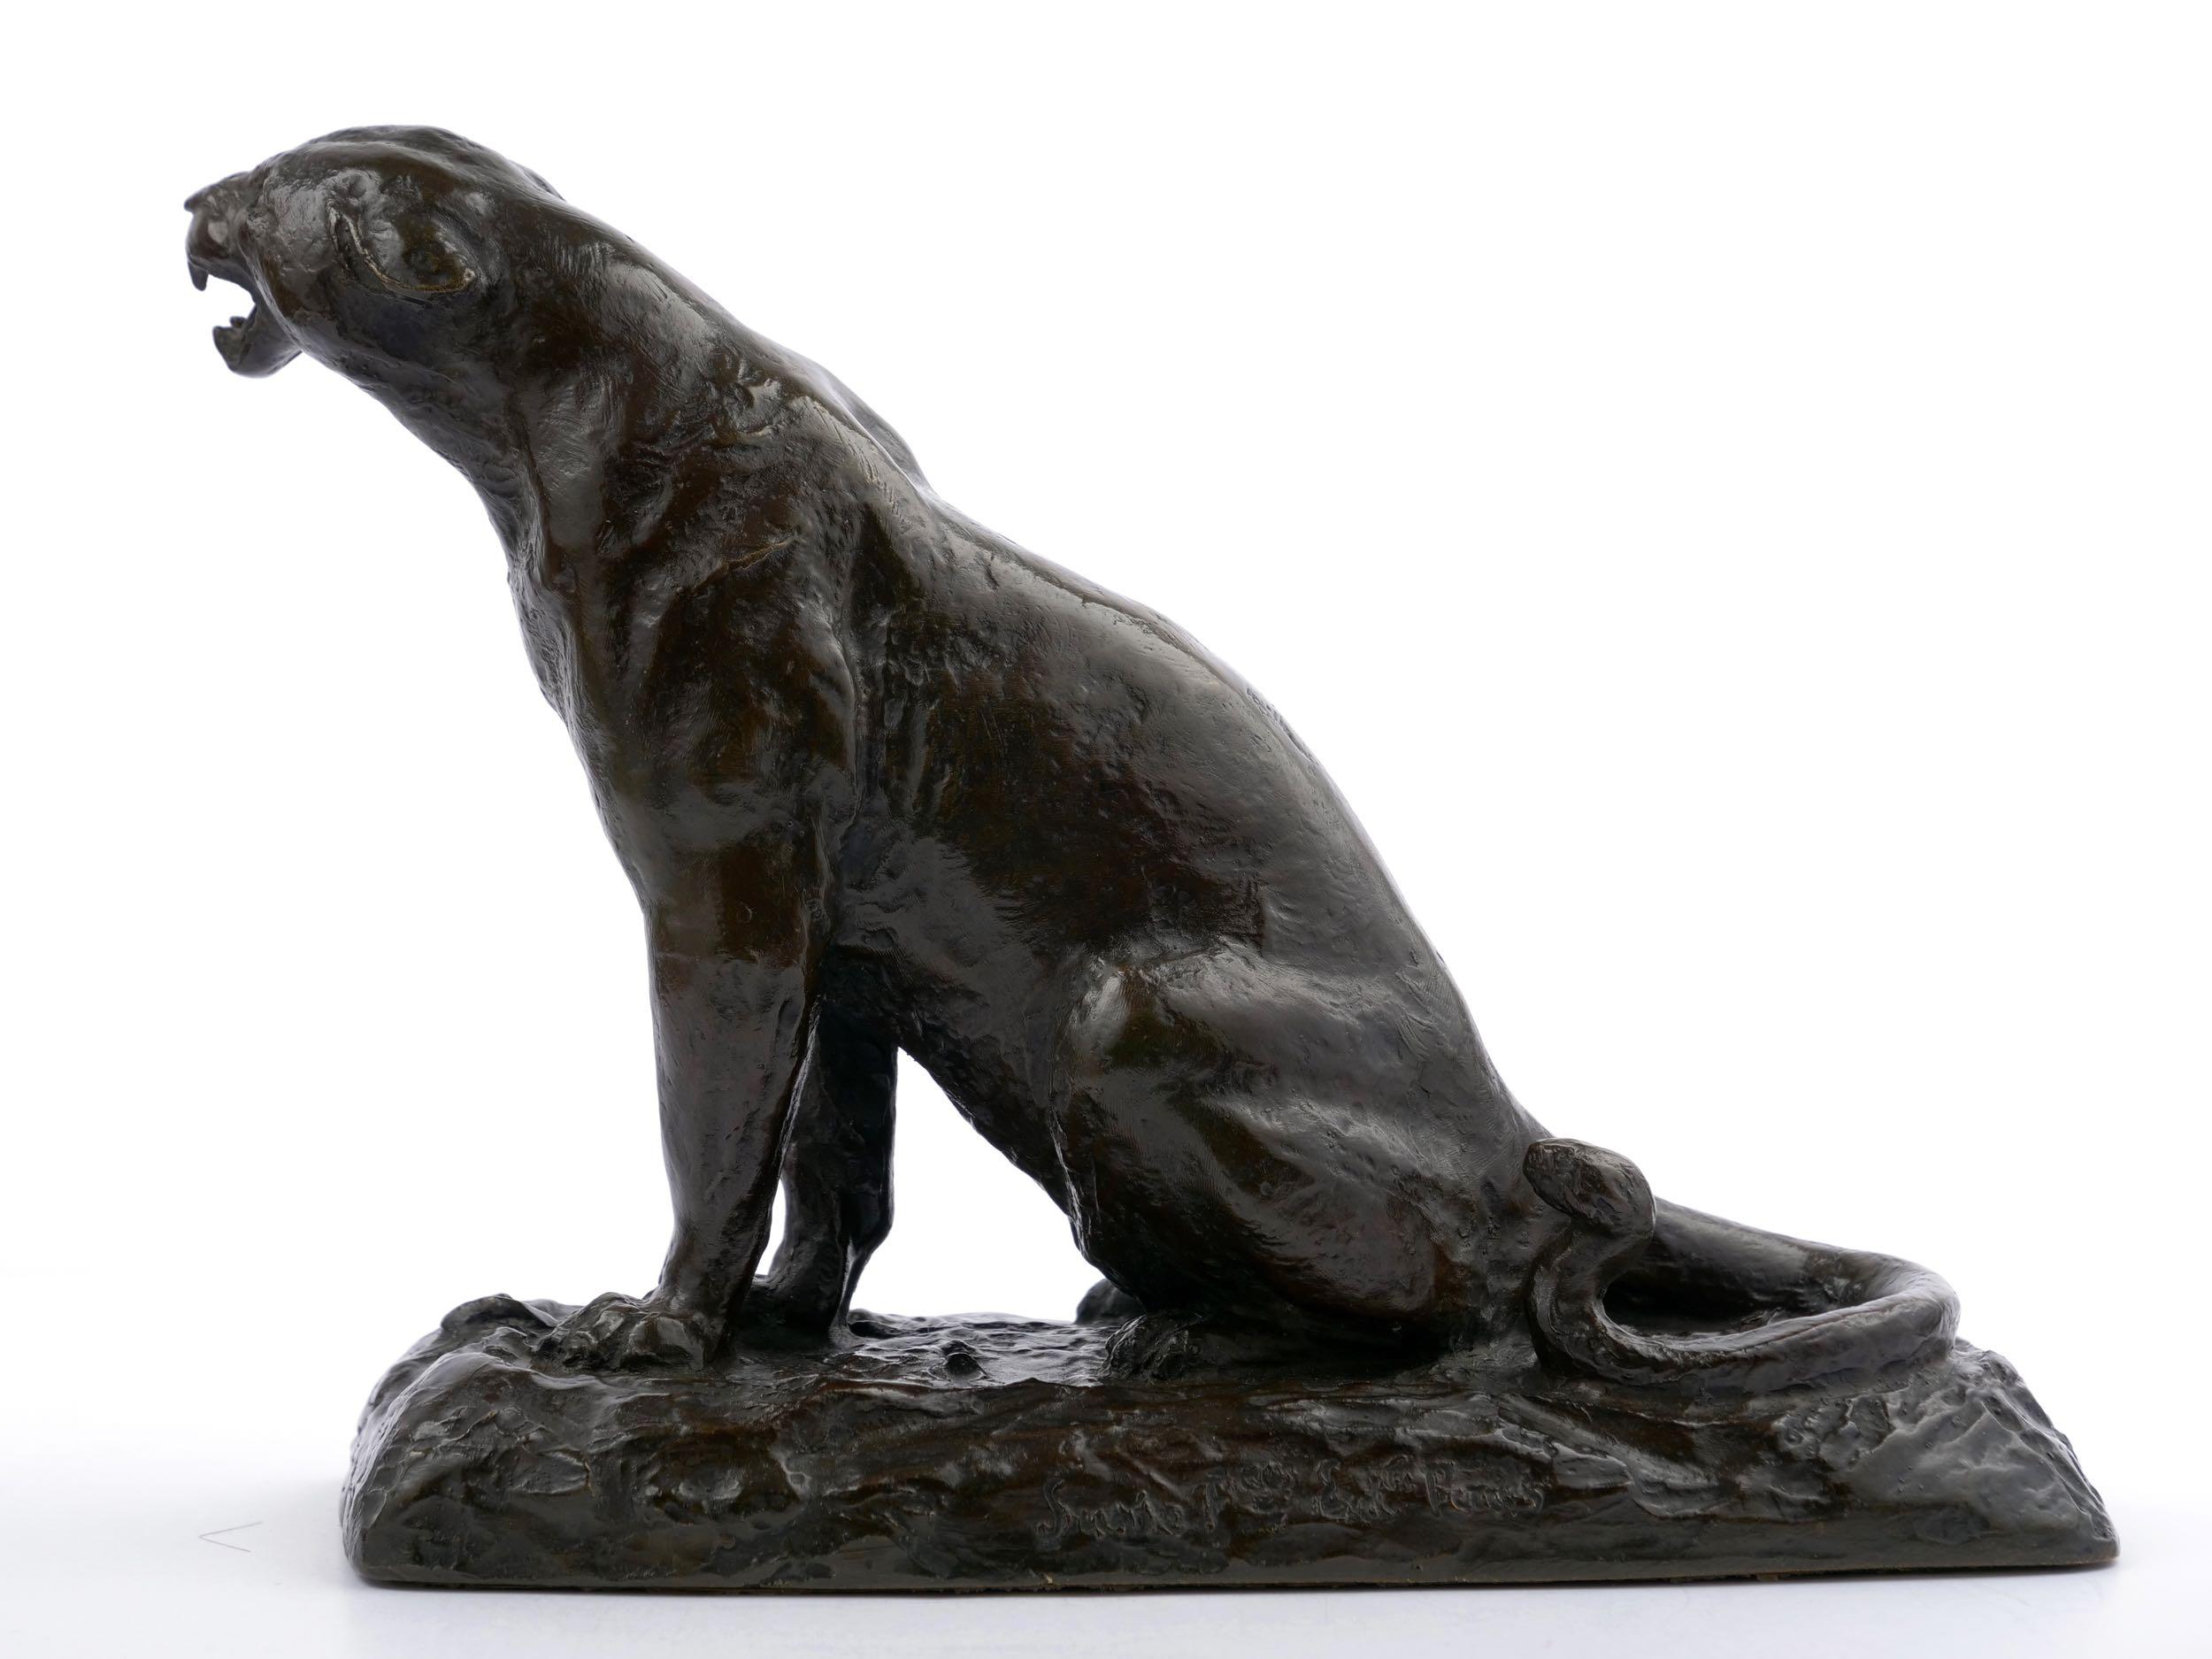 A vigorously modeled figure of a panther, Geoffroy executed this model in the nouveau and growing interest in modernism that began gripping the Animaliers during the first quarter of the 20th century. With a light impasto to the surface, it is